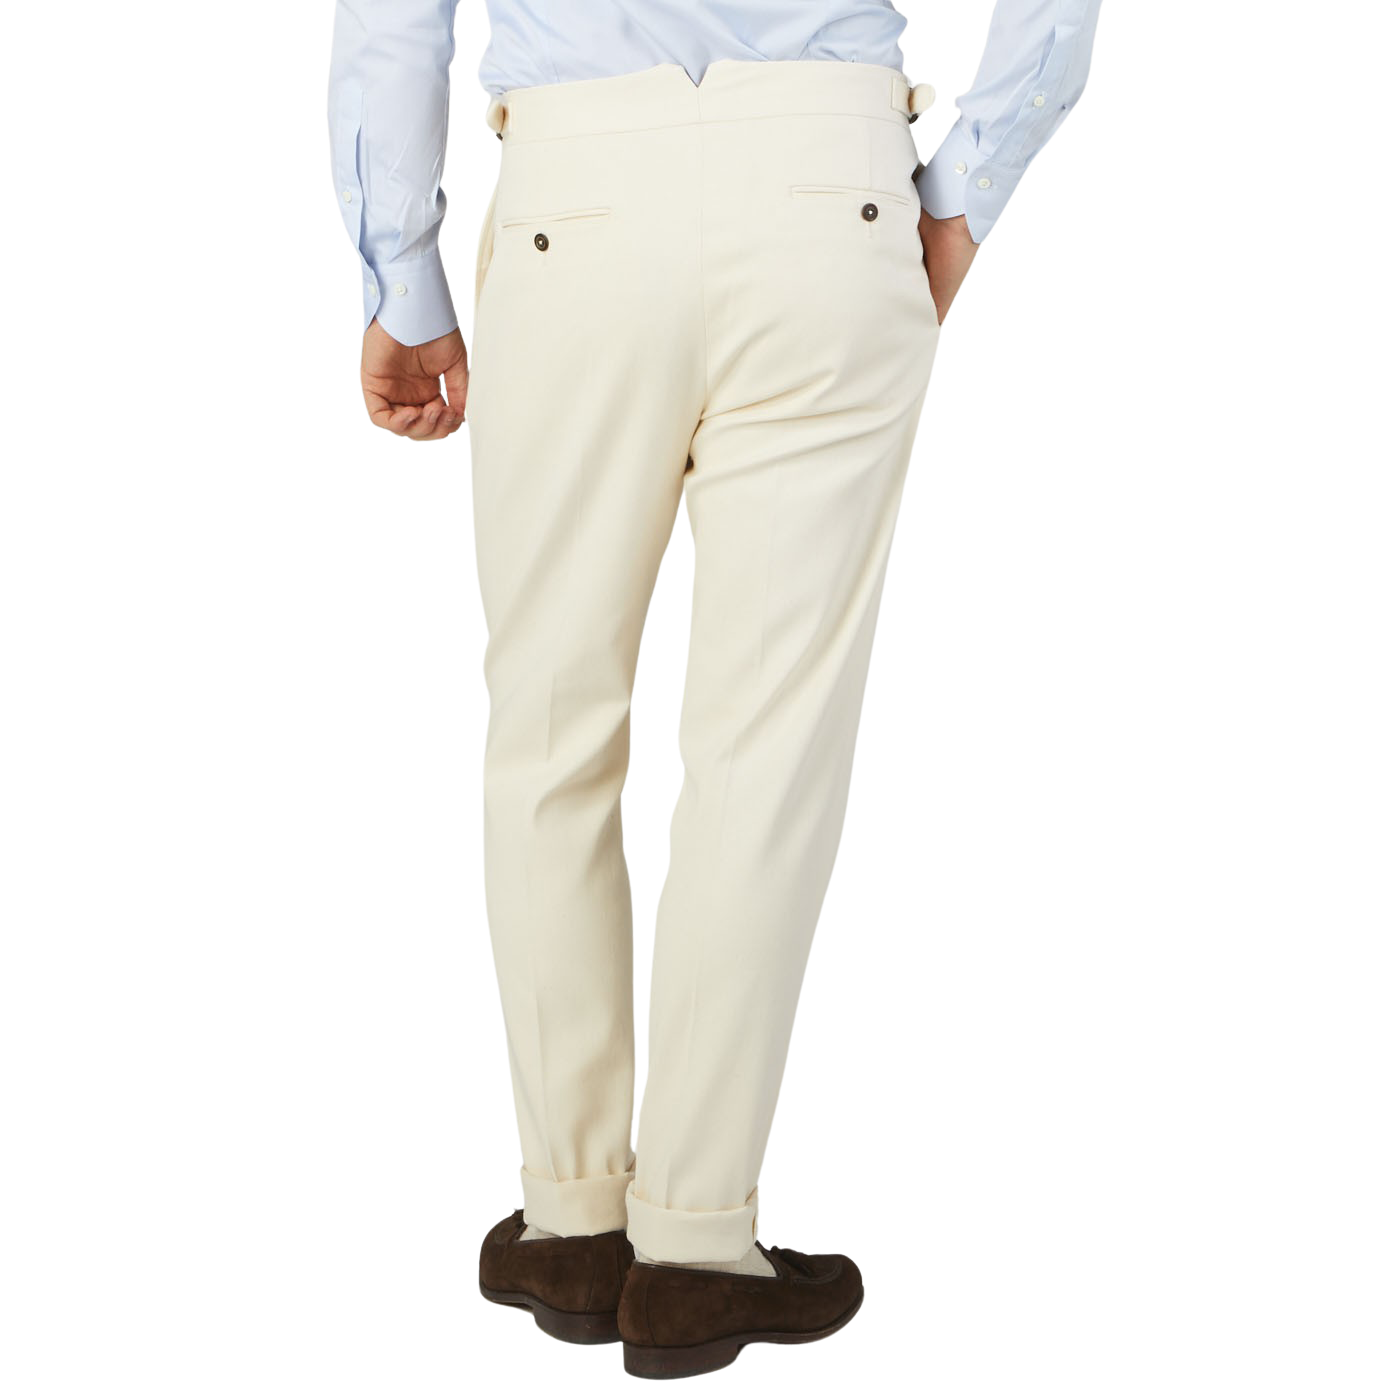 Buy Monte Carlo Mens Cotton Blend Light Blue Solid Trouser at Amazon.in